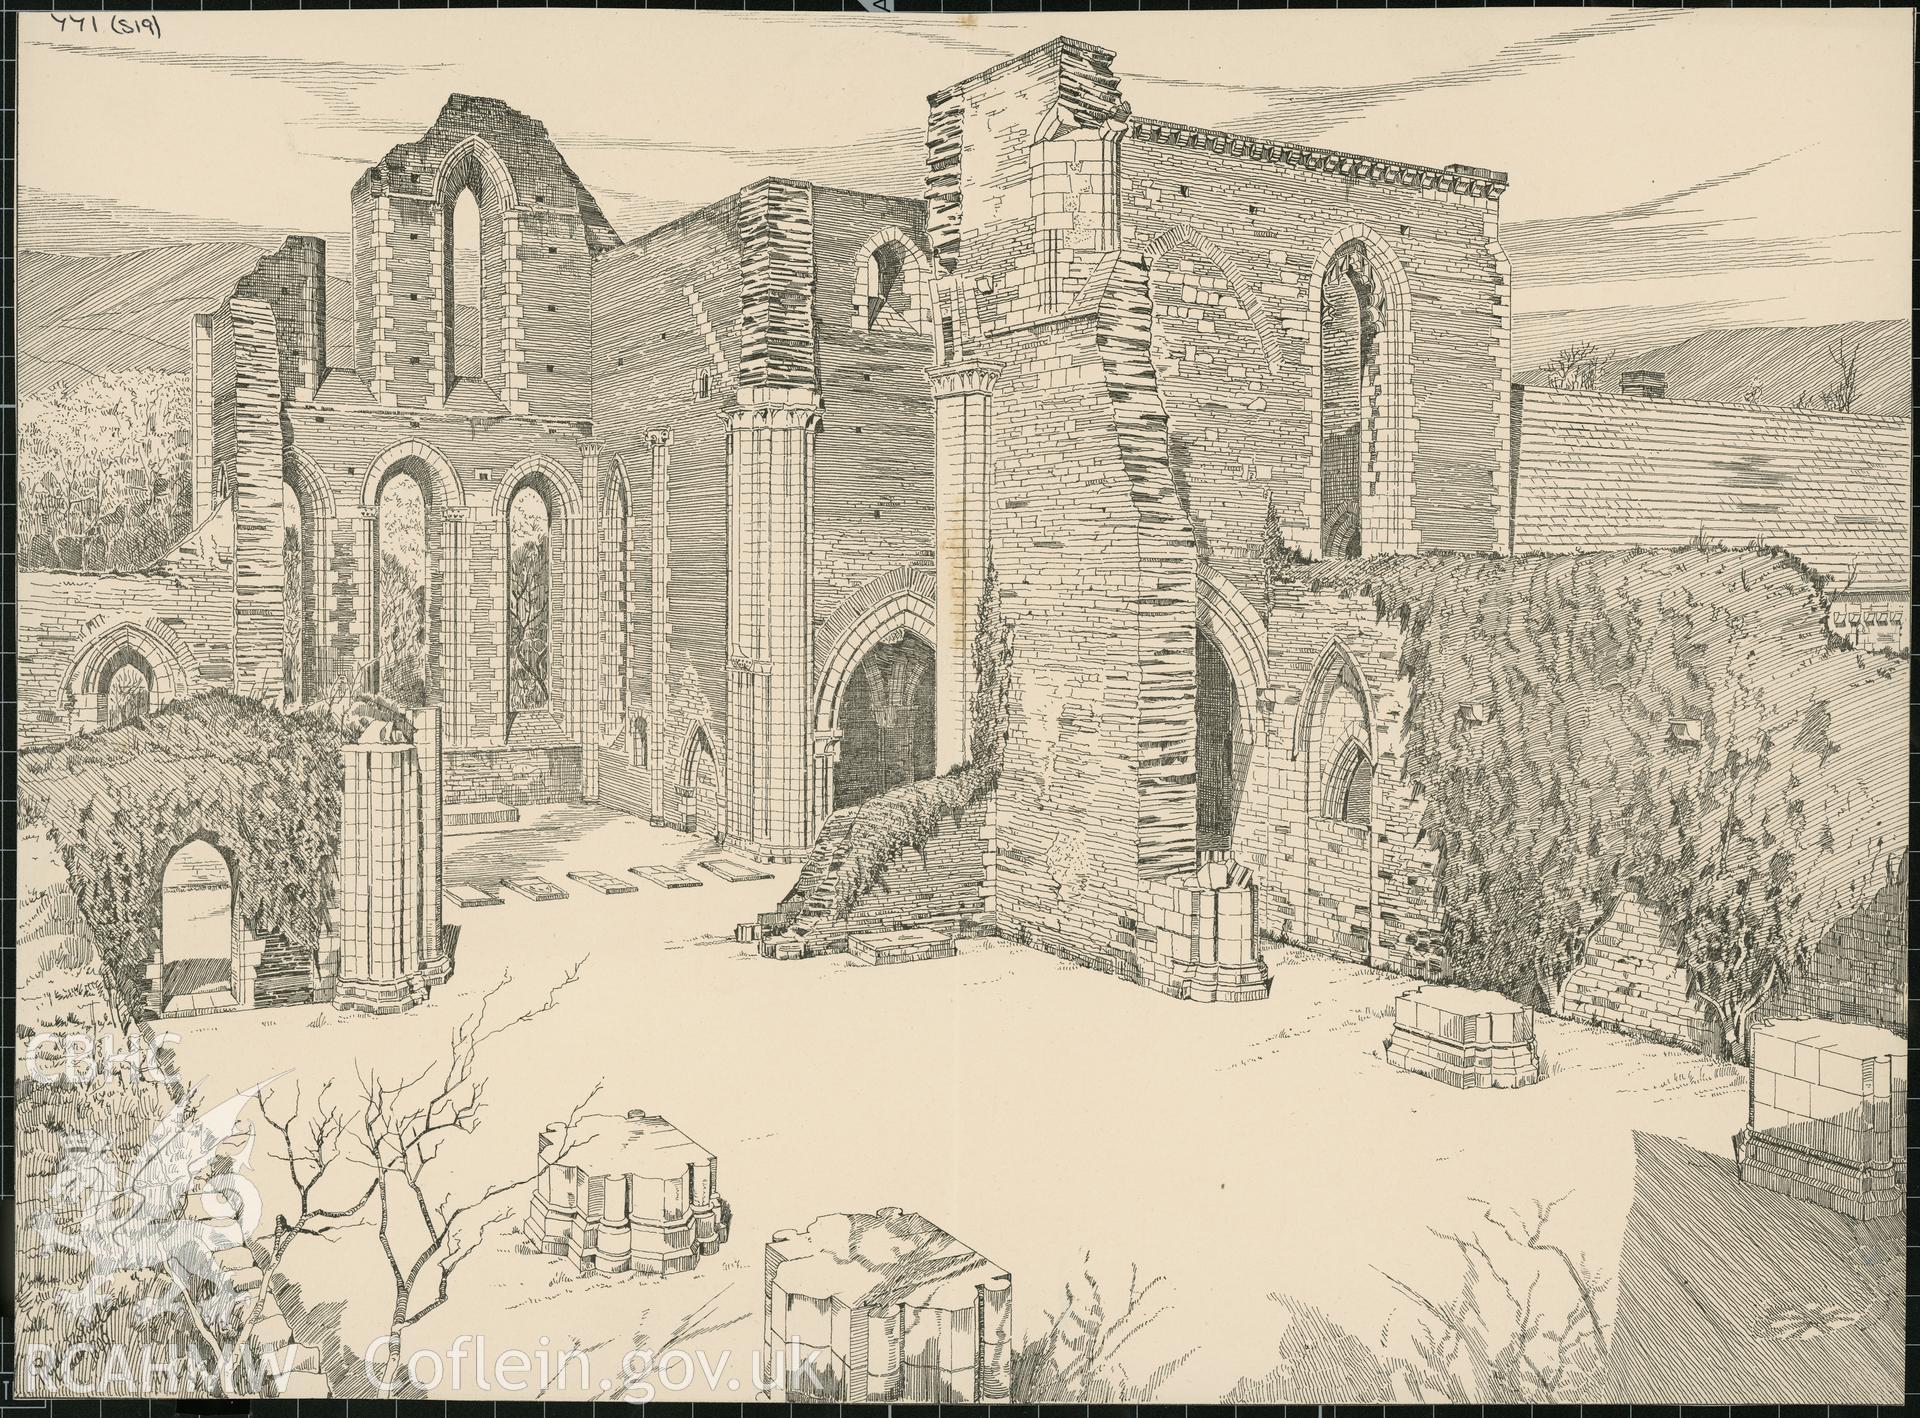 Digitised copy of a non RCAHMW drawing showing view of Valle Crucis Abbey.